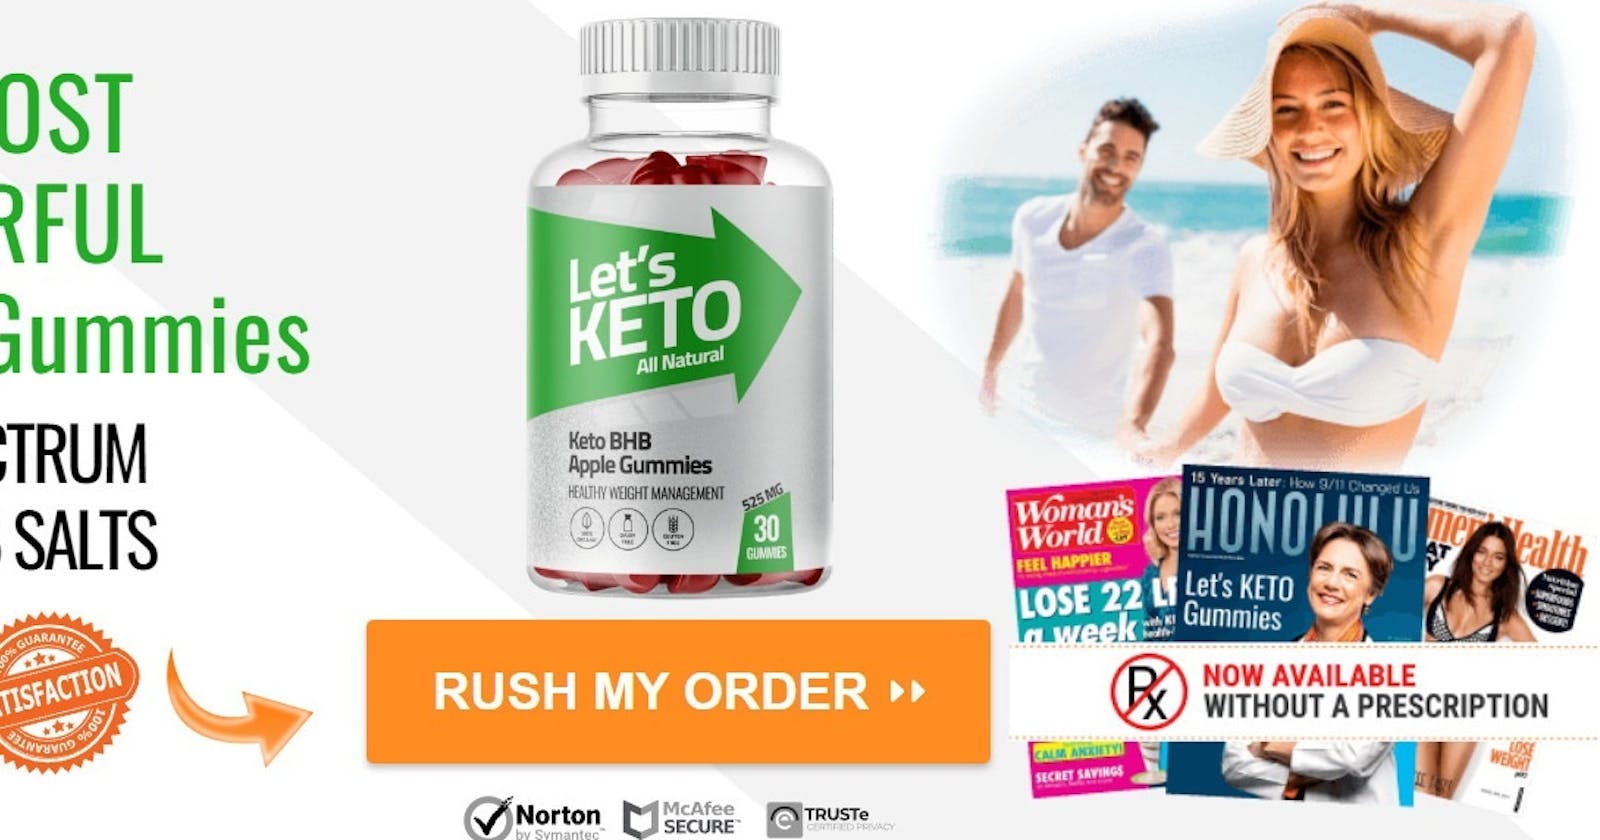 Where to Buy the Best Leanne Manas Keto South Africa and Get the Best Deals?